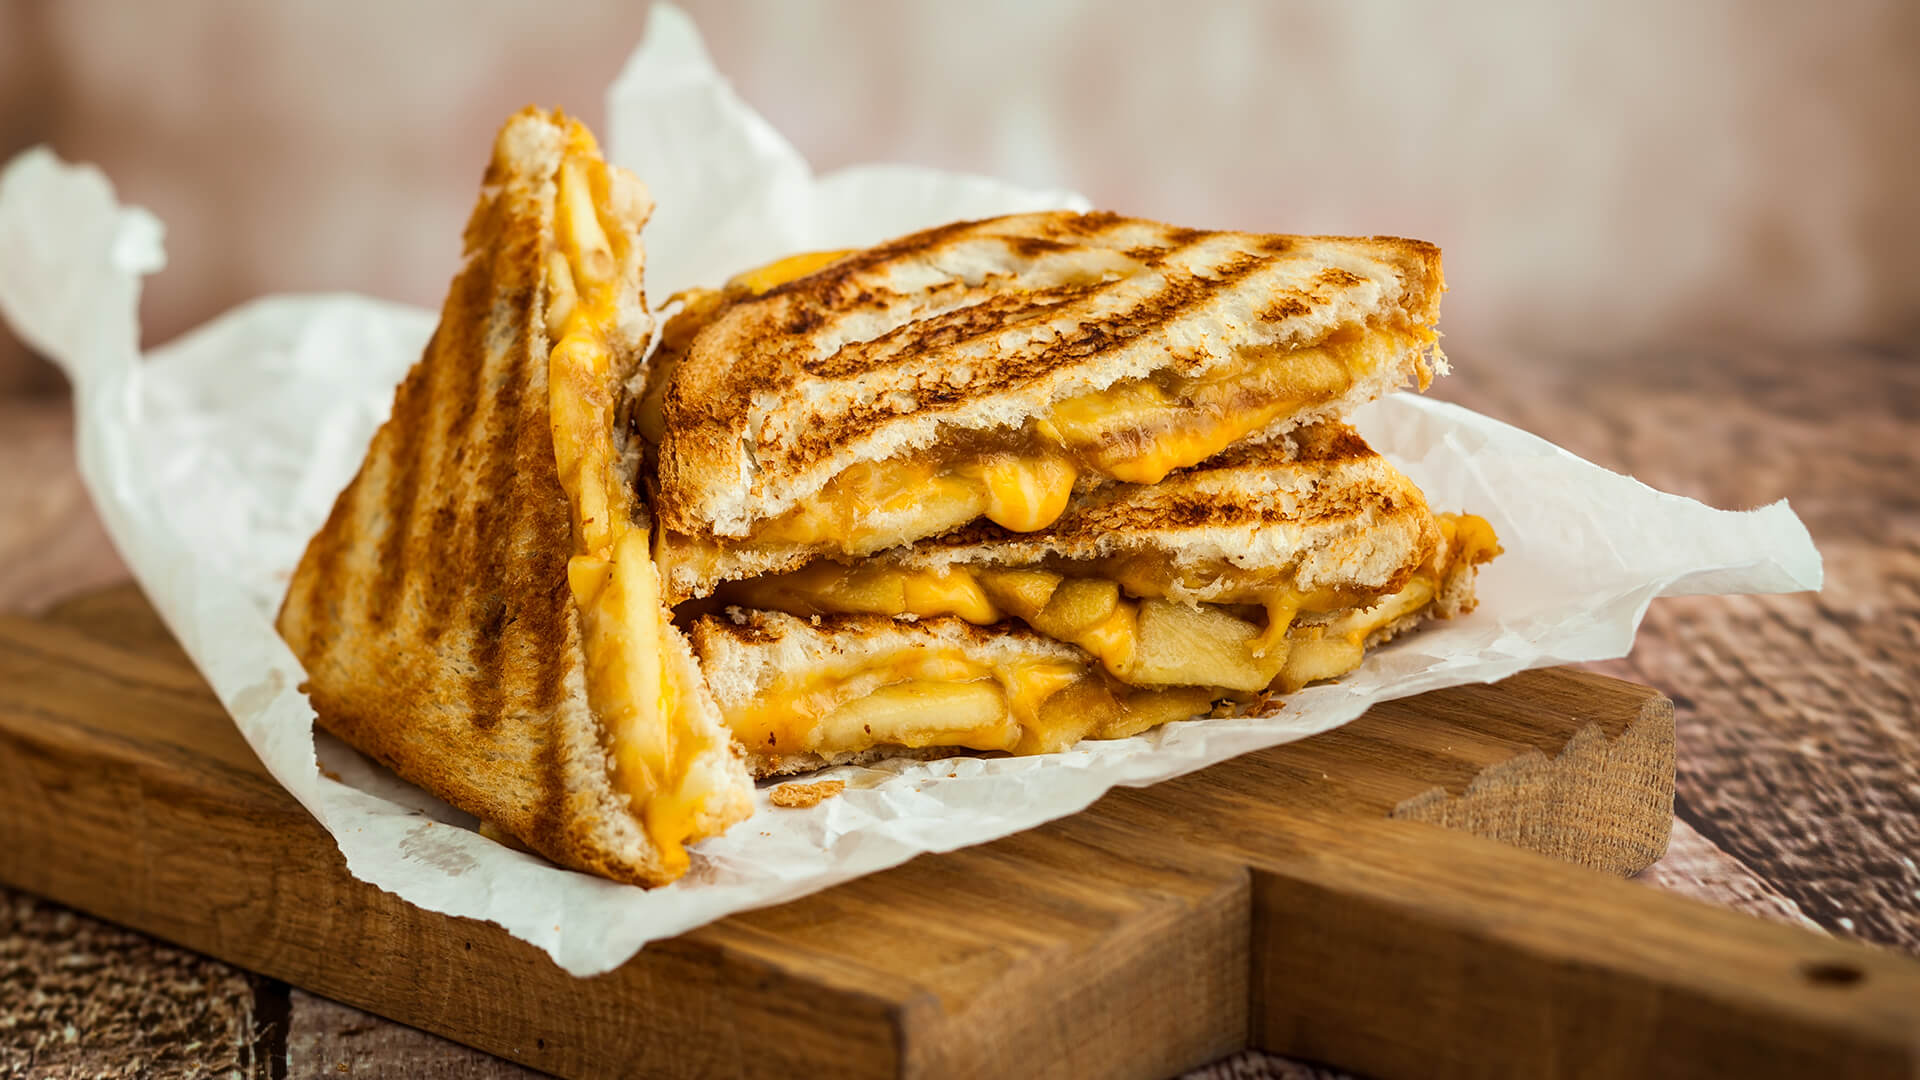 Make Your Kid's Grilled Cheese Sandwich with Steakhouse Craft Butter